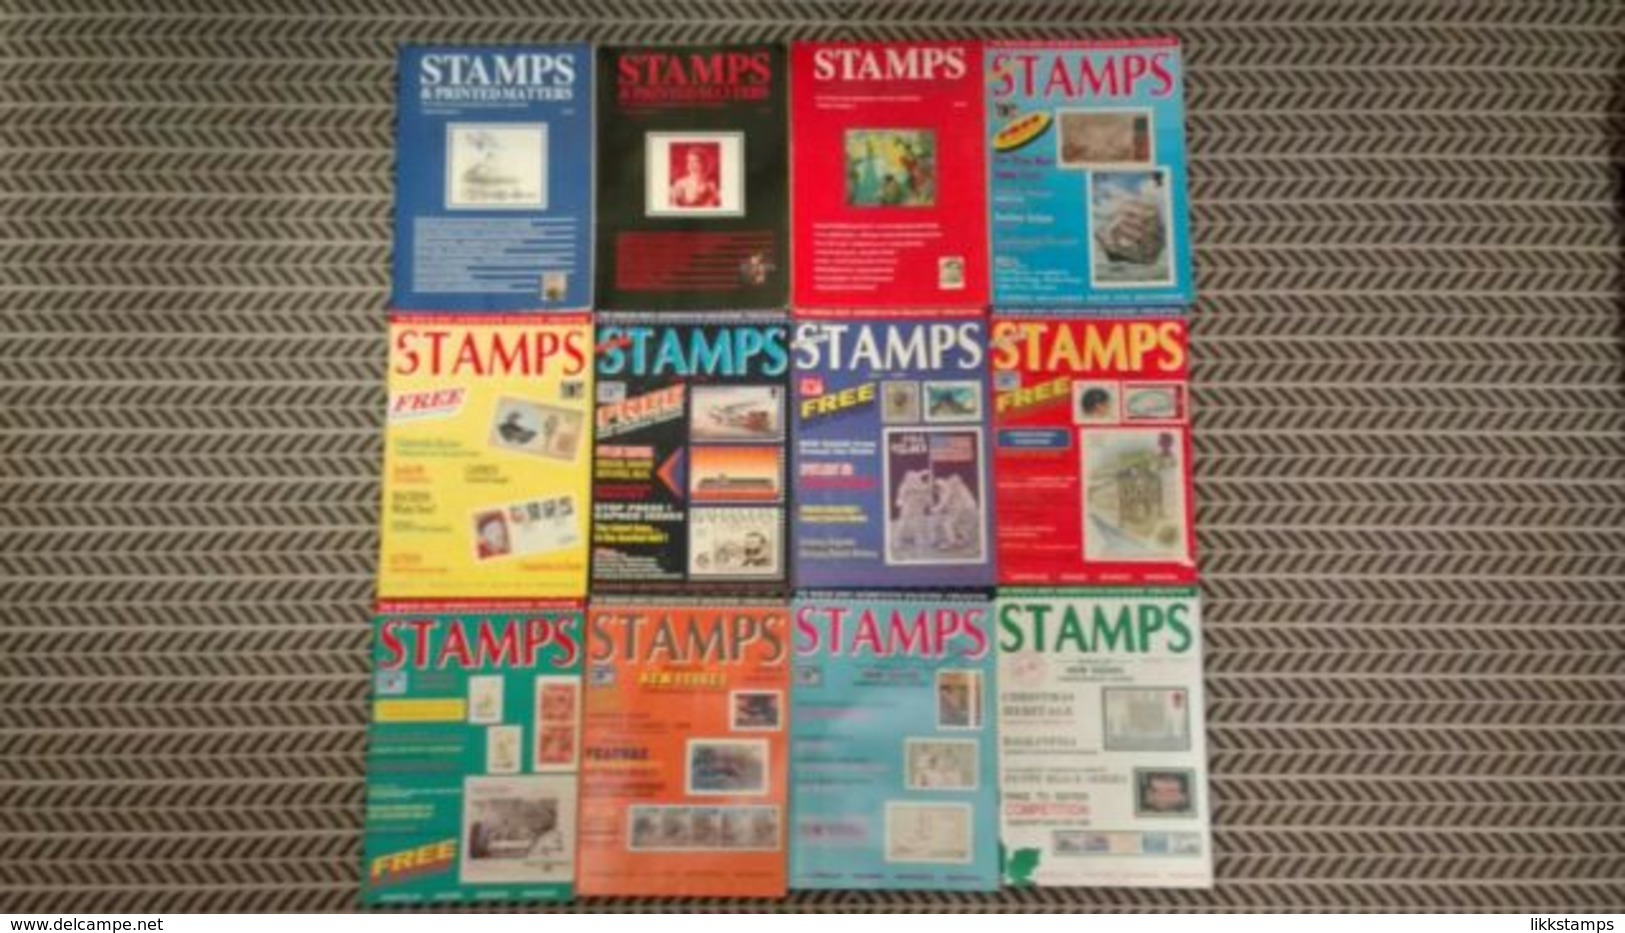 STAMPS AND PRINTED MATTER/STAMPS MAGAZINES JANUARY 1989 TO DECEMBER 1989  VOLUME 9 #L0011 - English (from 1941)